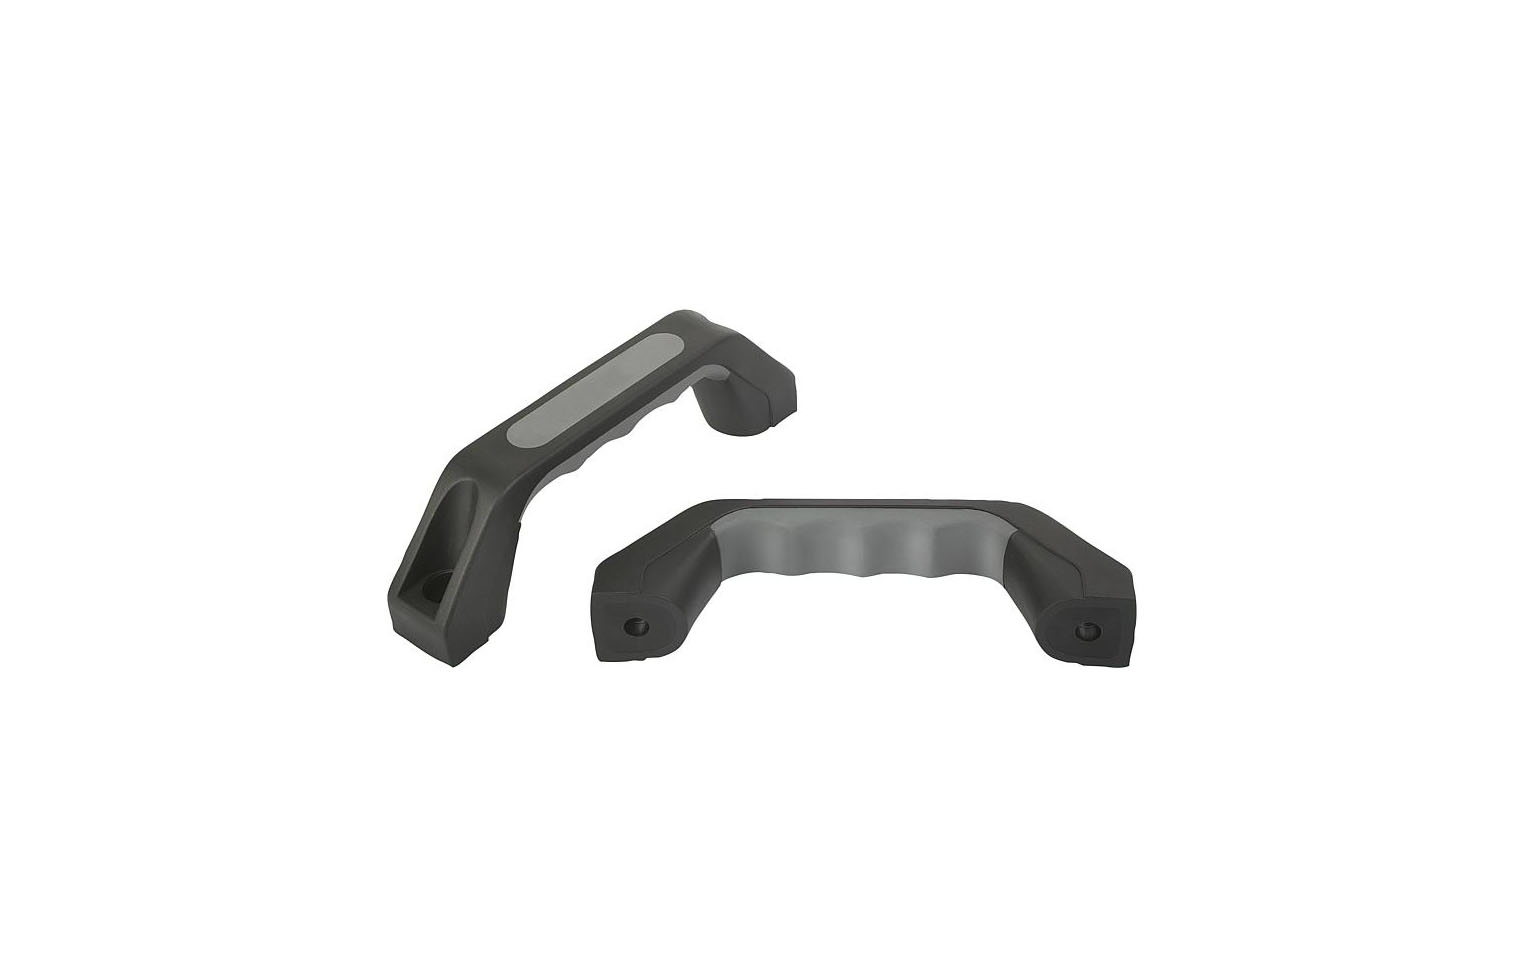 K0171_Pull handles with soft inner face